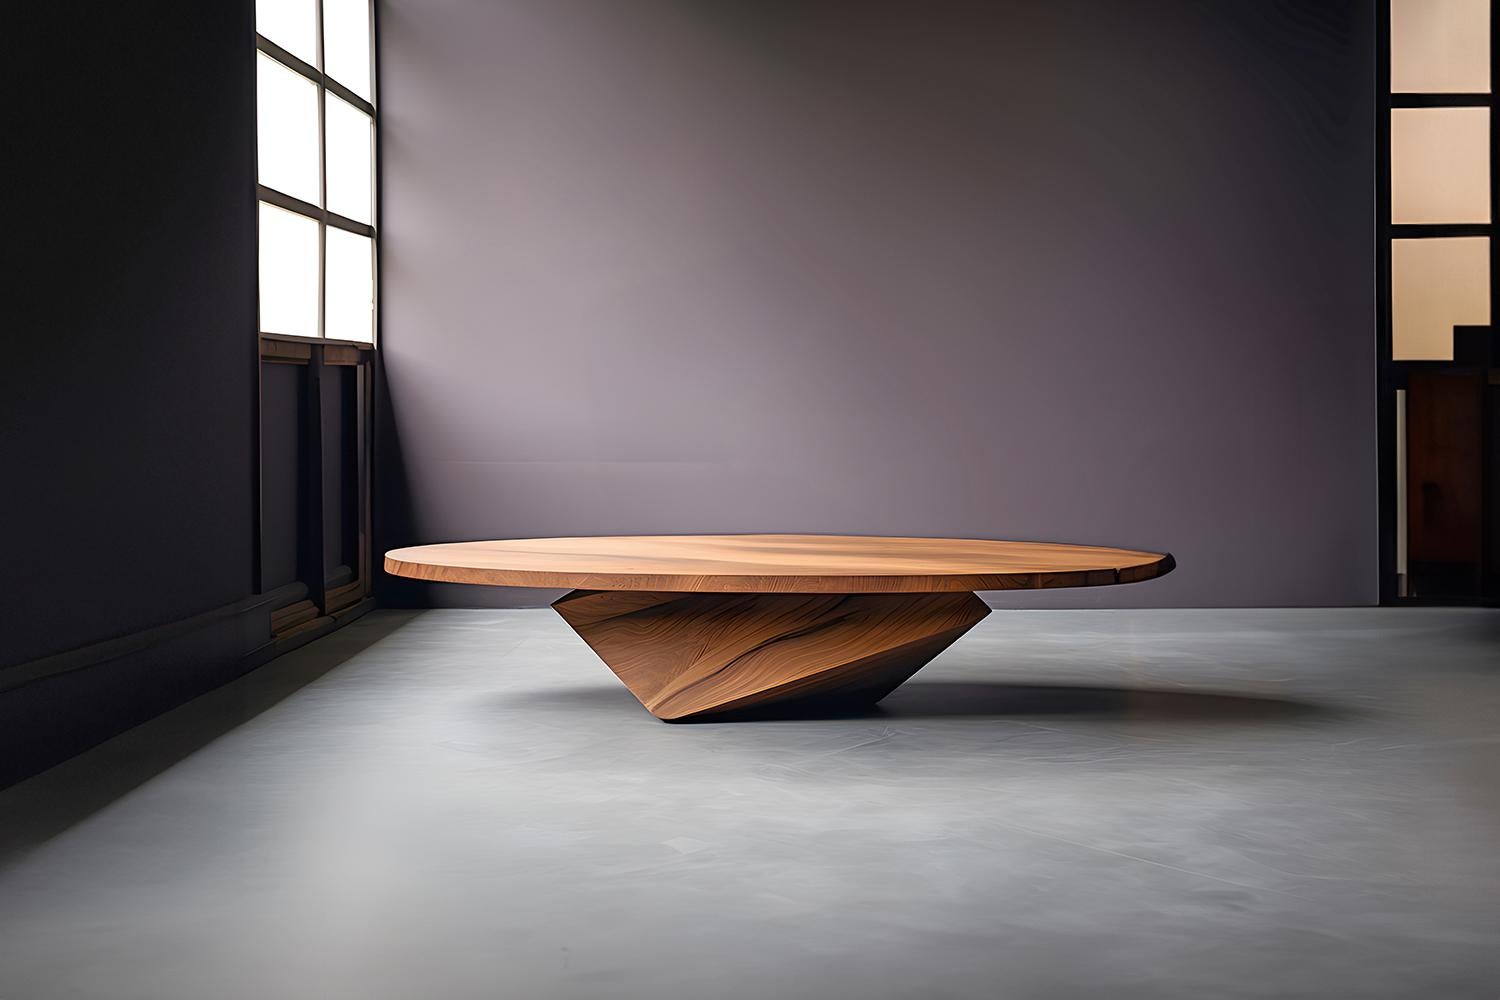 Sculptural Coffee Table Made of Solid Wood, Center Table Solace S10 by NONO


The Solace table series, designed by Joel Escalona, is a furniture collection that exudes balance and presence, thanks to its sensuous, dense, and irregular shapes. These